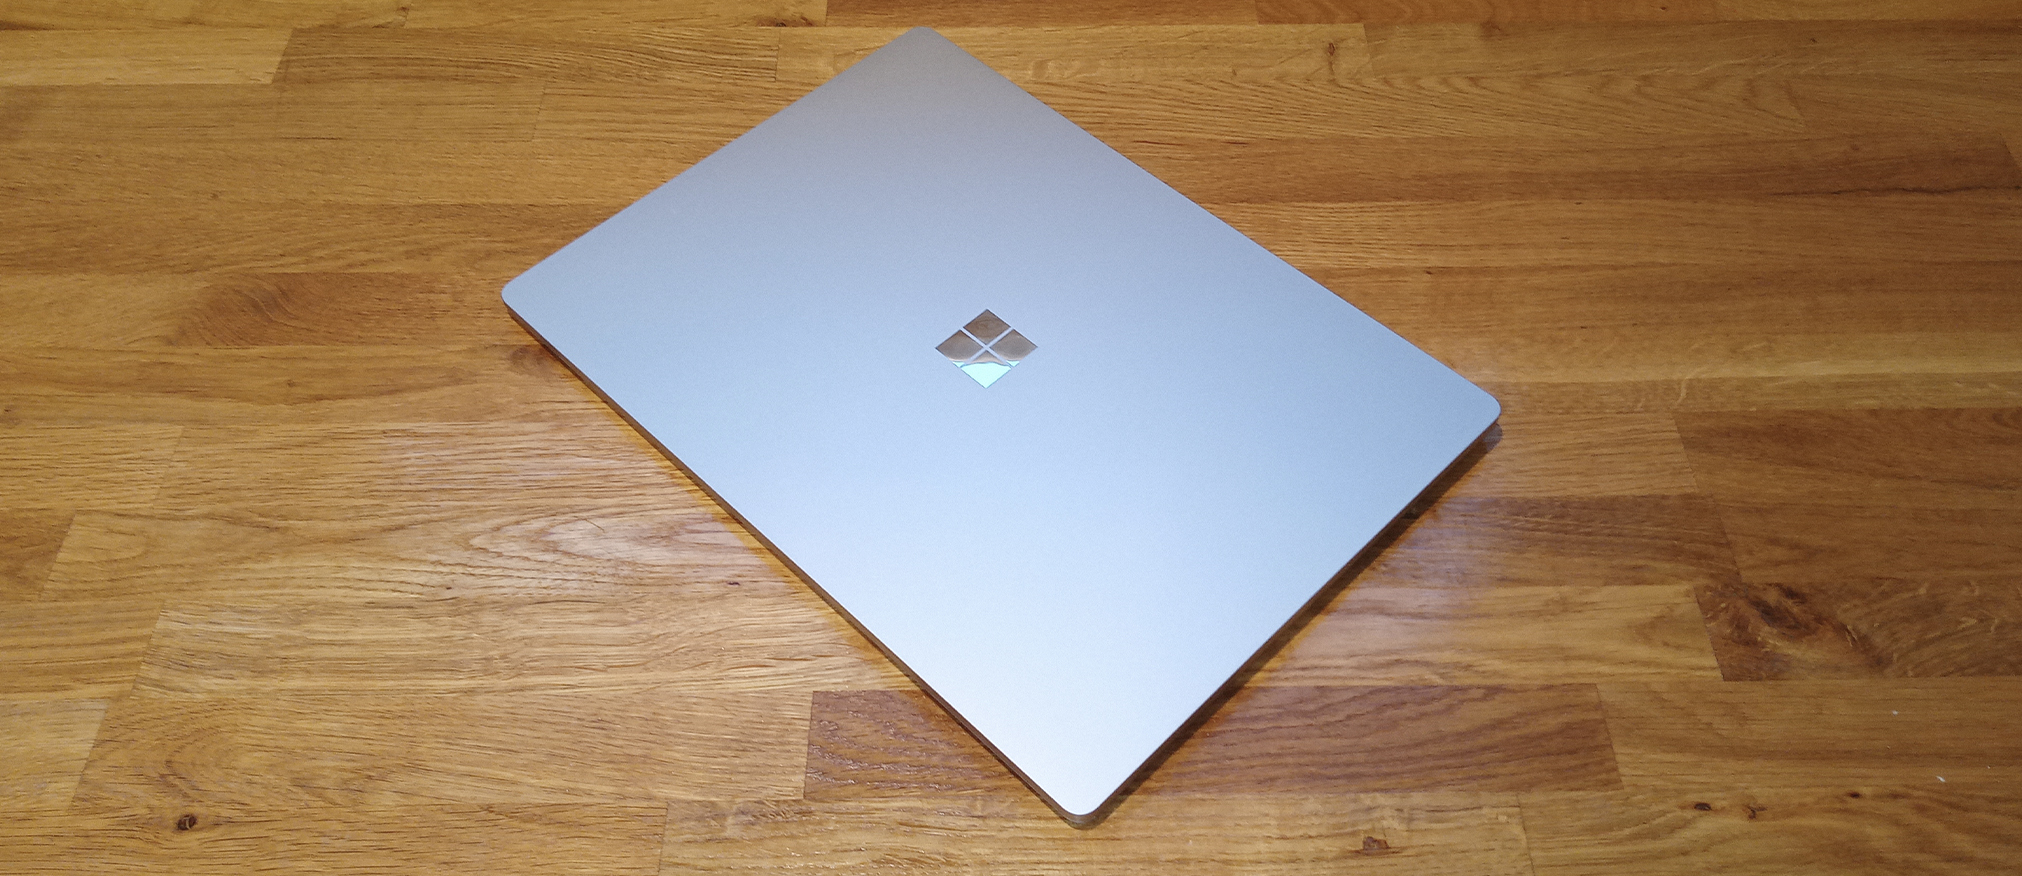 Microsoft Surface Laptop 5 review (13-inch): A beautiful design